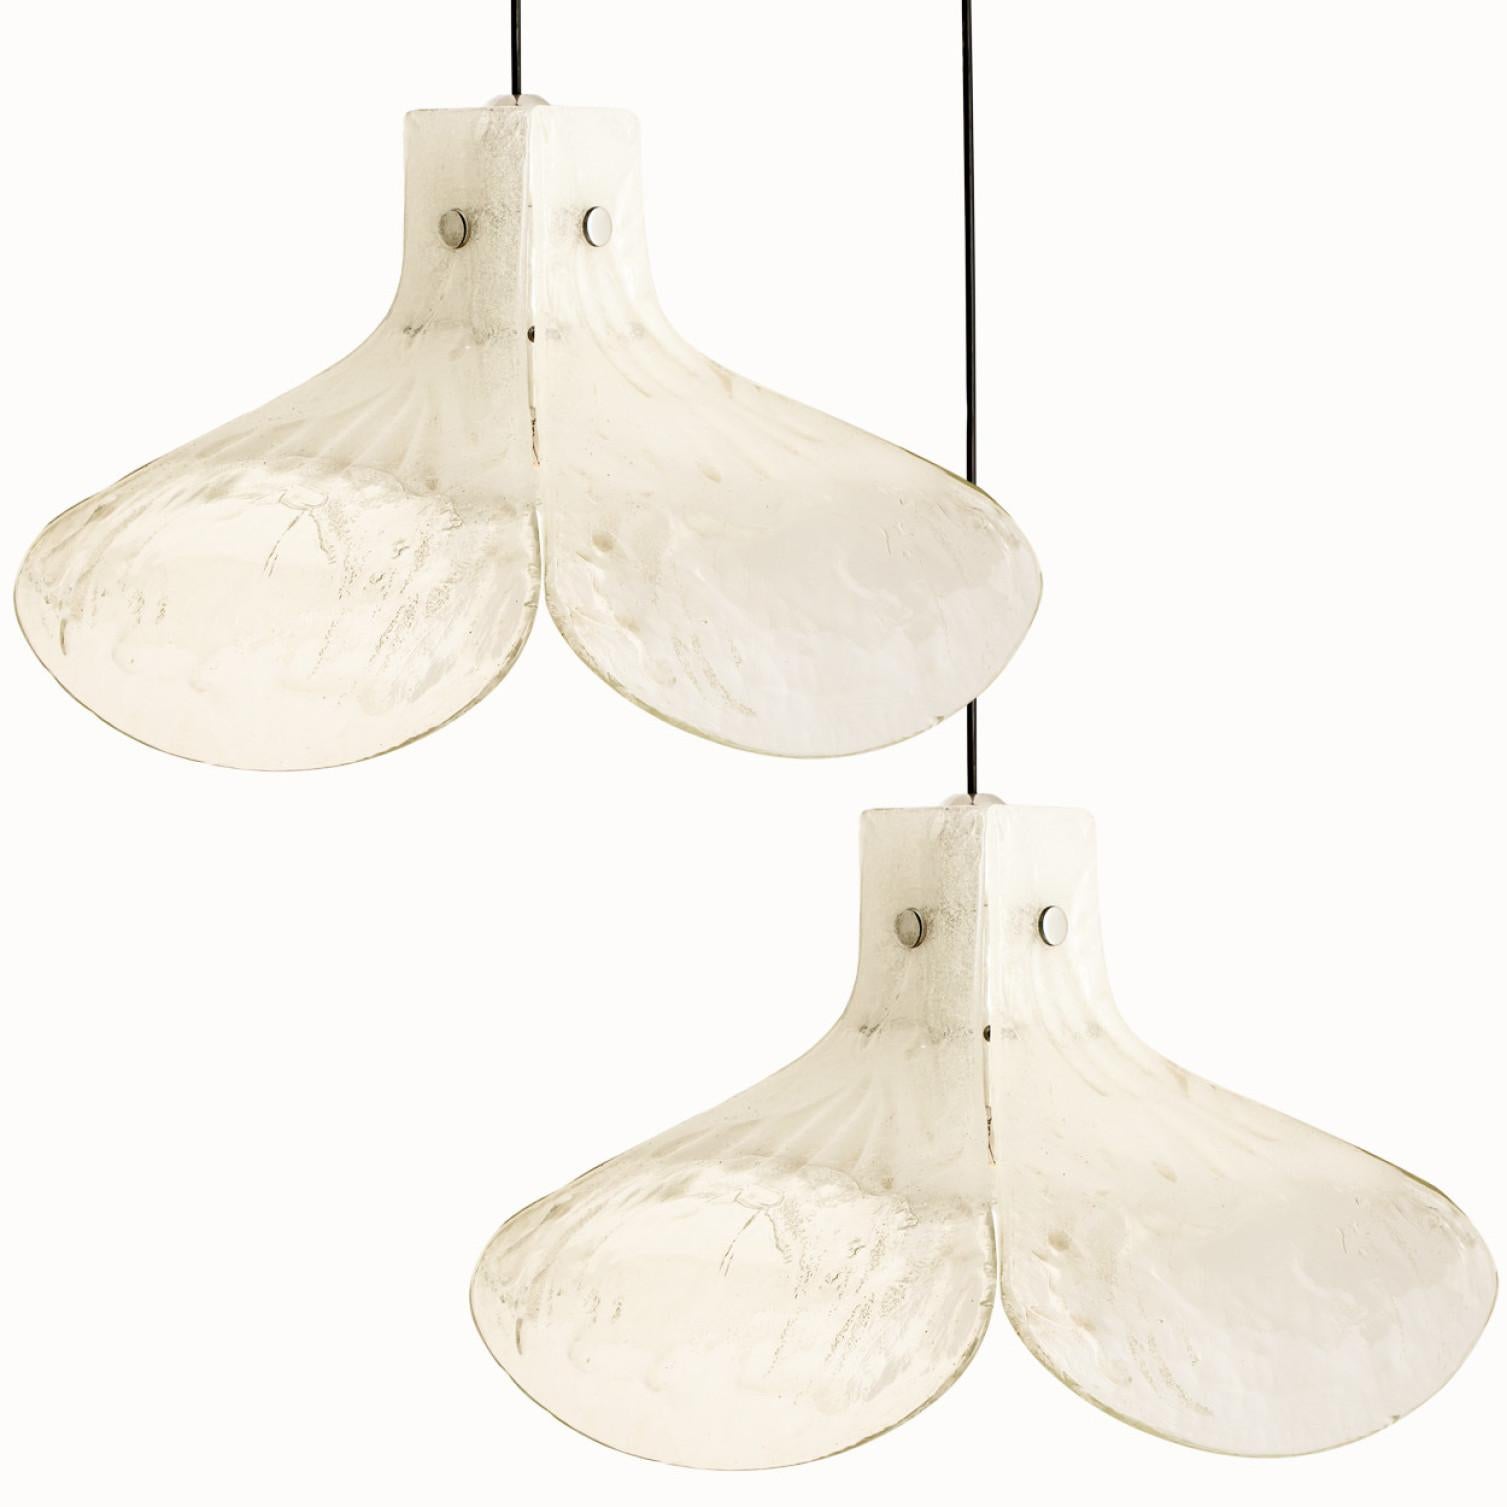 1 of the 2 pendant lamps model LS185 by Carlo Nason for Mazzega.
Four crystal clear leaves compose this beautiful piece made in thick handmade Murano glass.

Measures: H 16.93” (43 cm), D 23.62